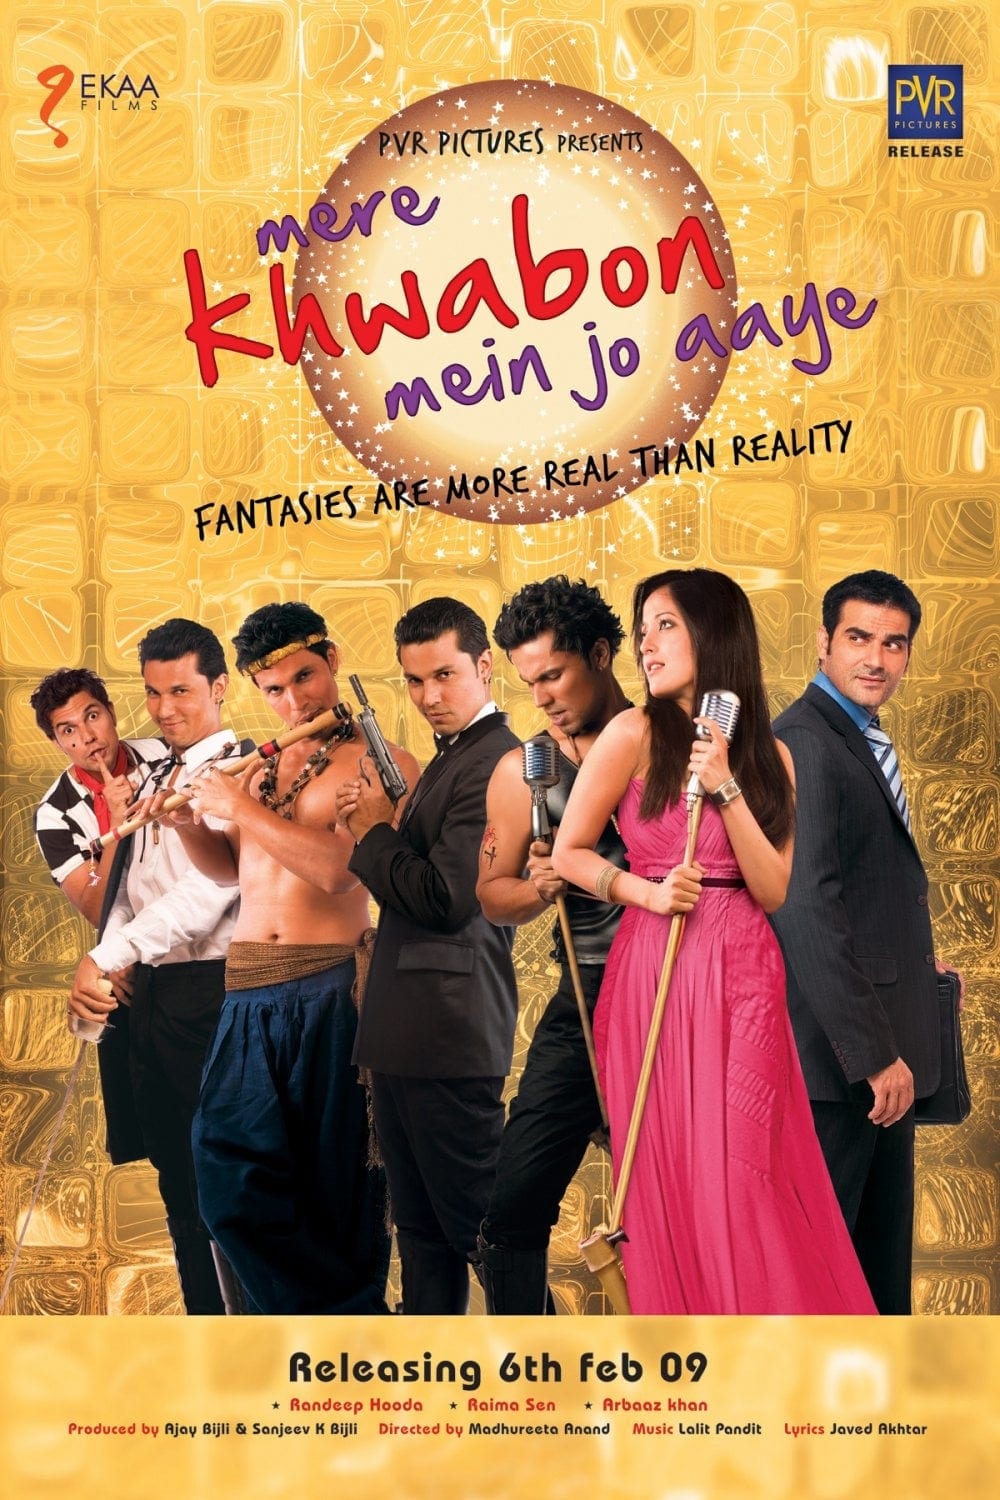 Poster for the movie "Mere Khwabon Mein Jo Aaye"